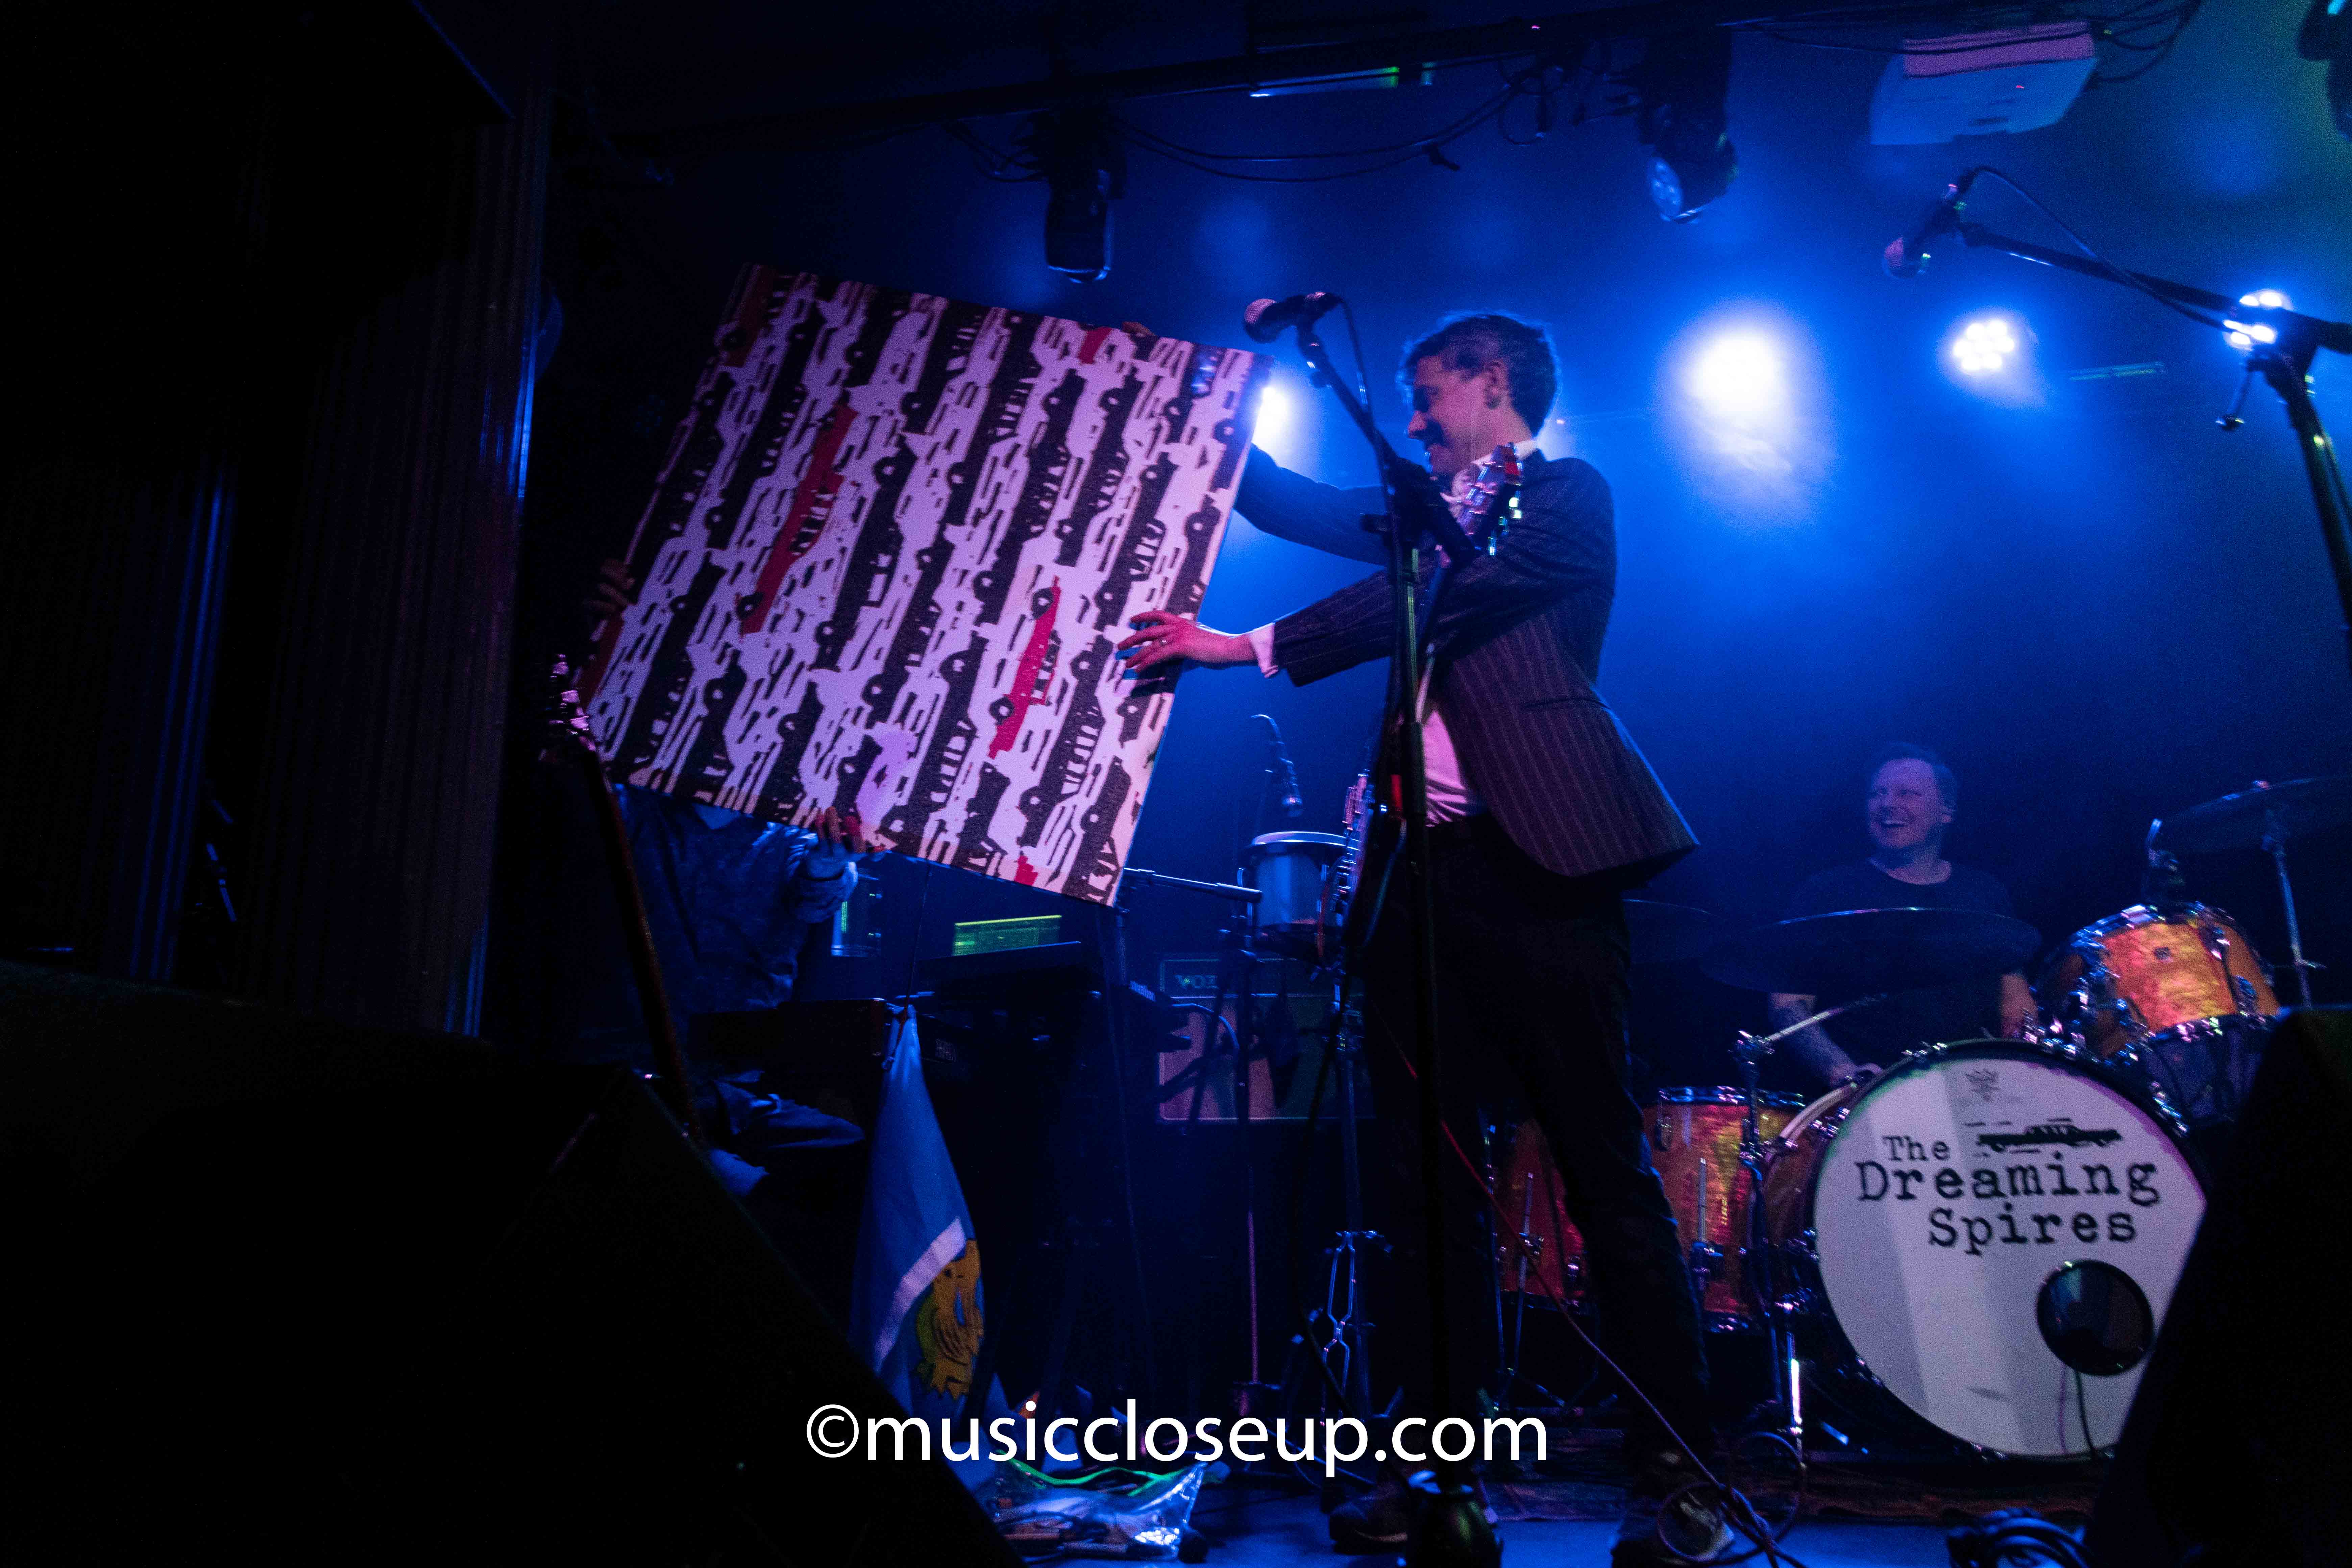 The Dreaming Spires live at The Water Rats: Robin Bennett handing Thomas Collison a keyboard screen decorated with illustrations of cars